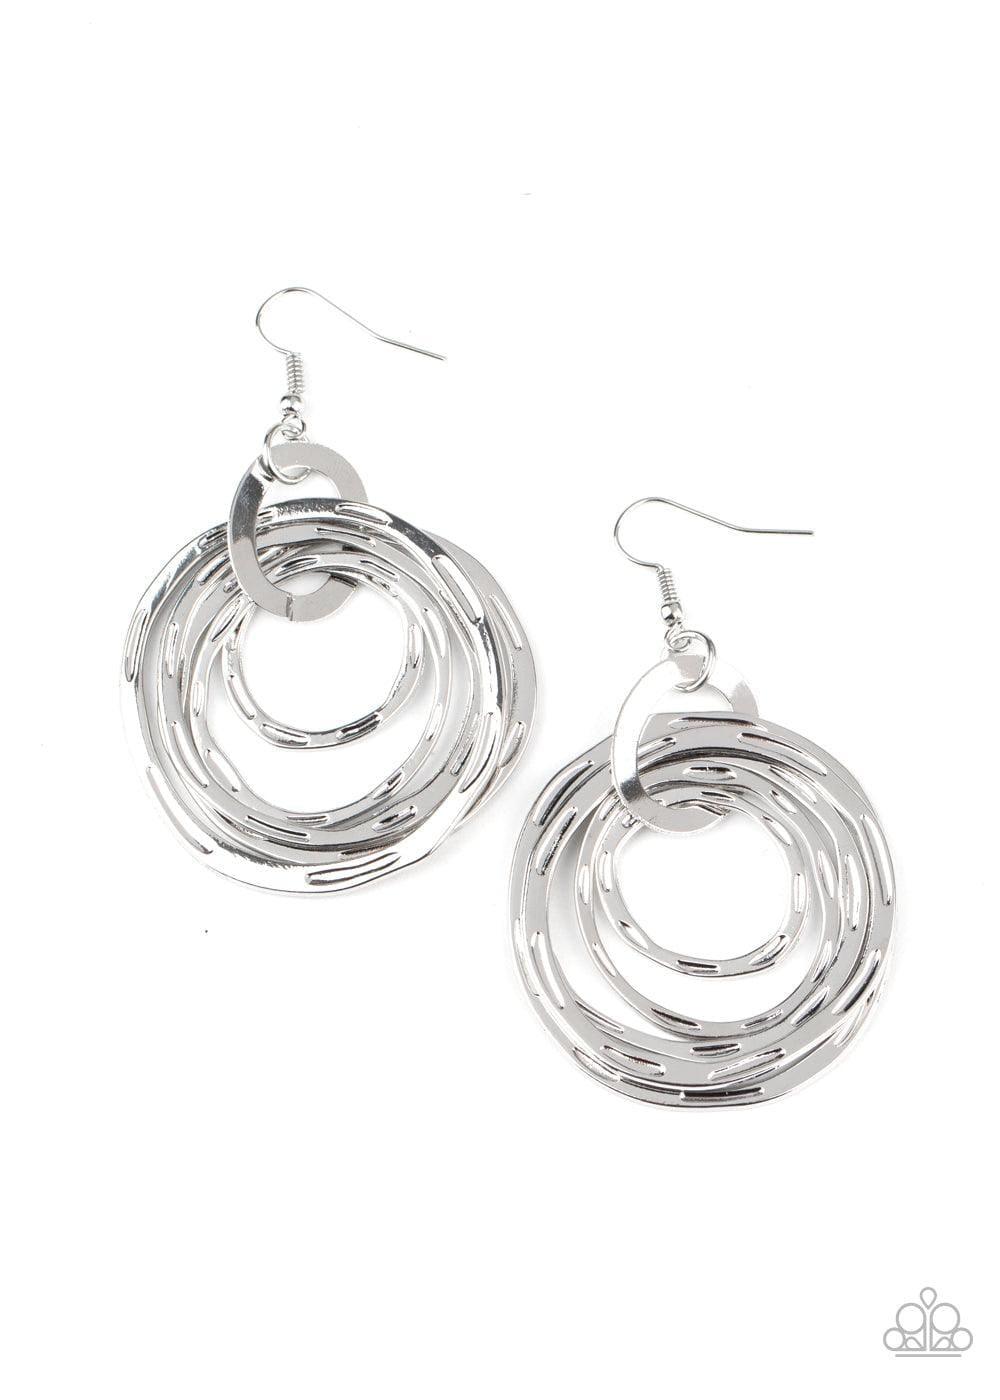 Paparazzi Accessories - Ringing Radiance - Silver Earrings - Bling by JessieK